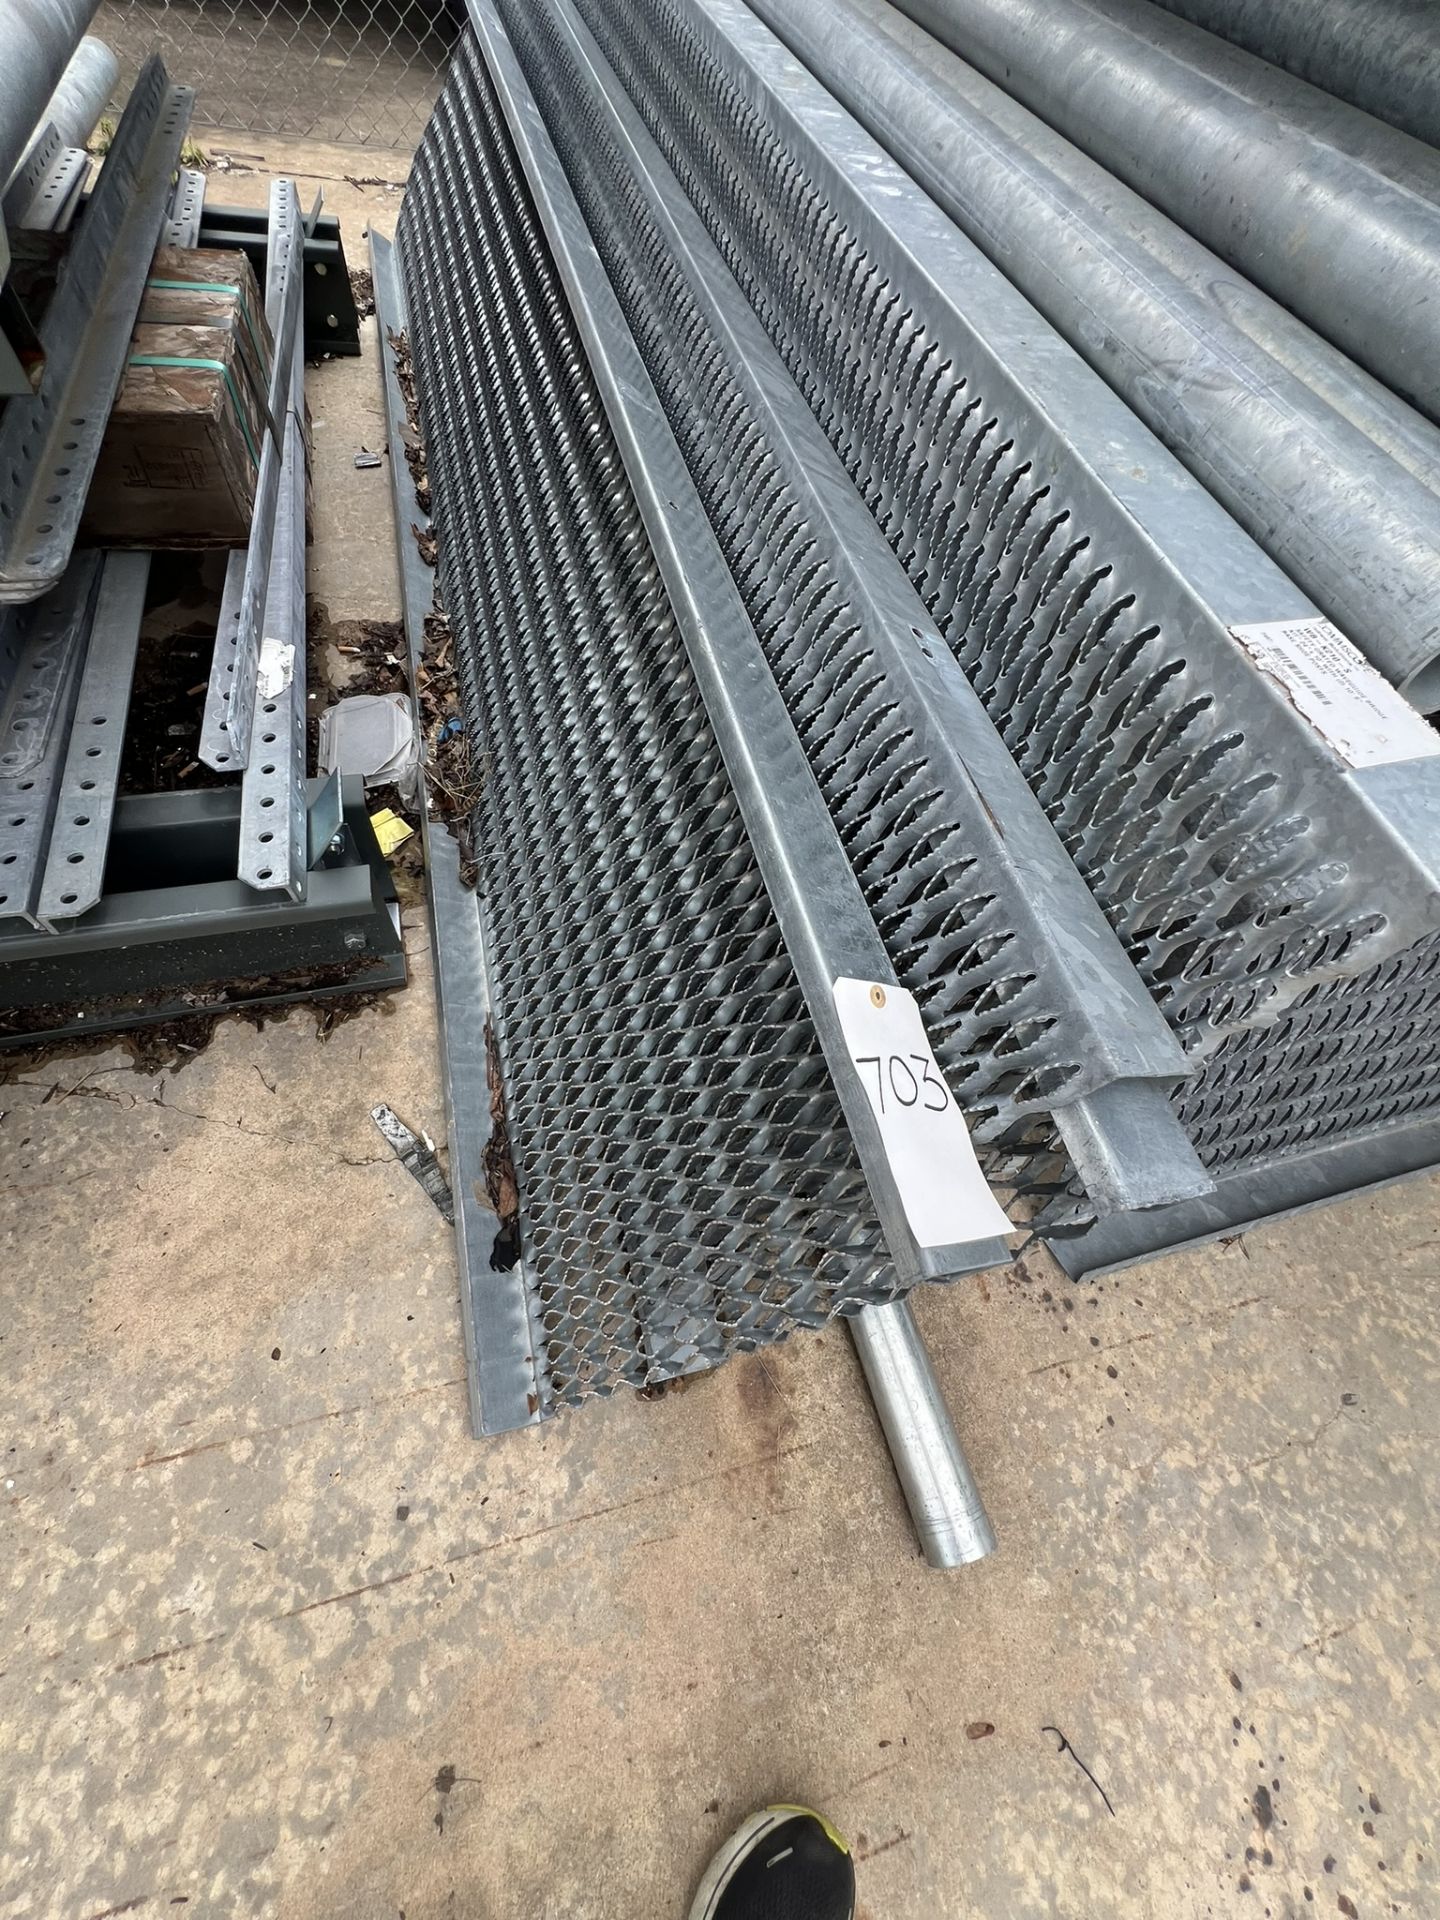 Safety Grate Bridge (8 2ftx10ft sections), legs, other pieces, do not know if it is full set